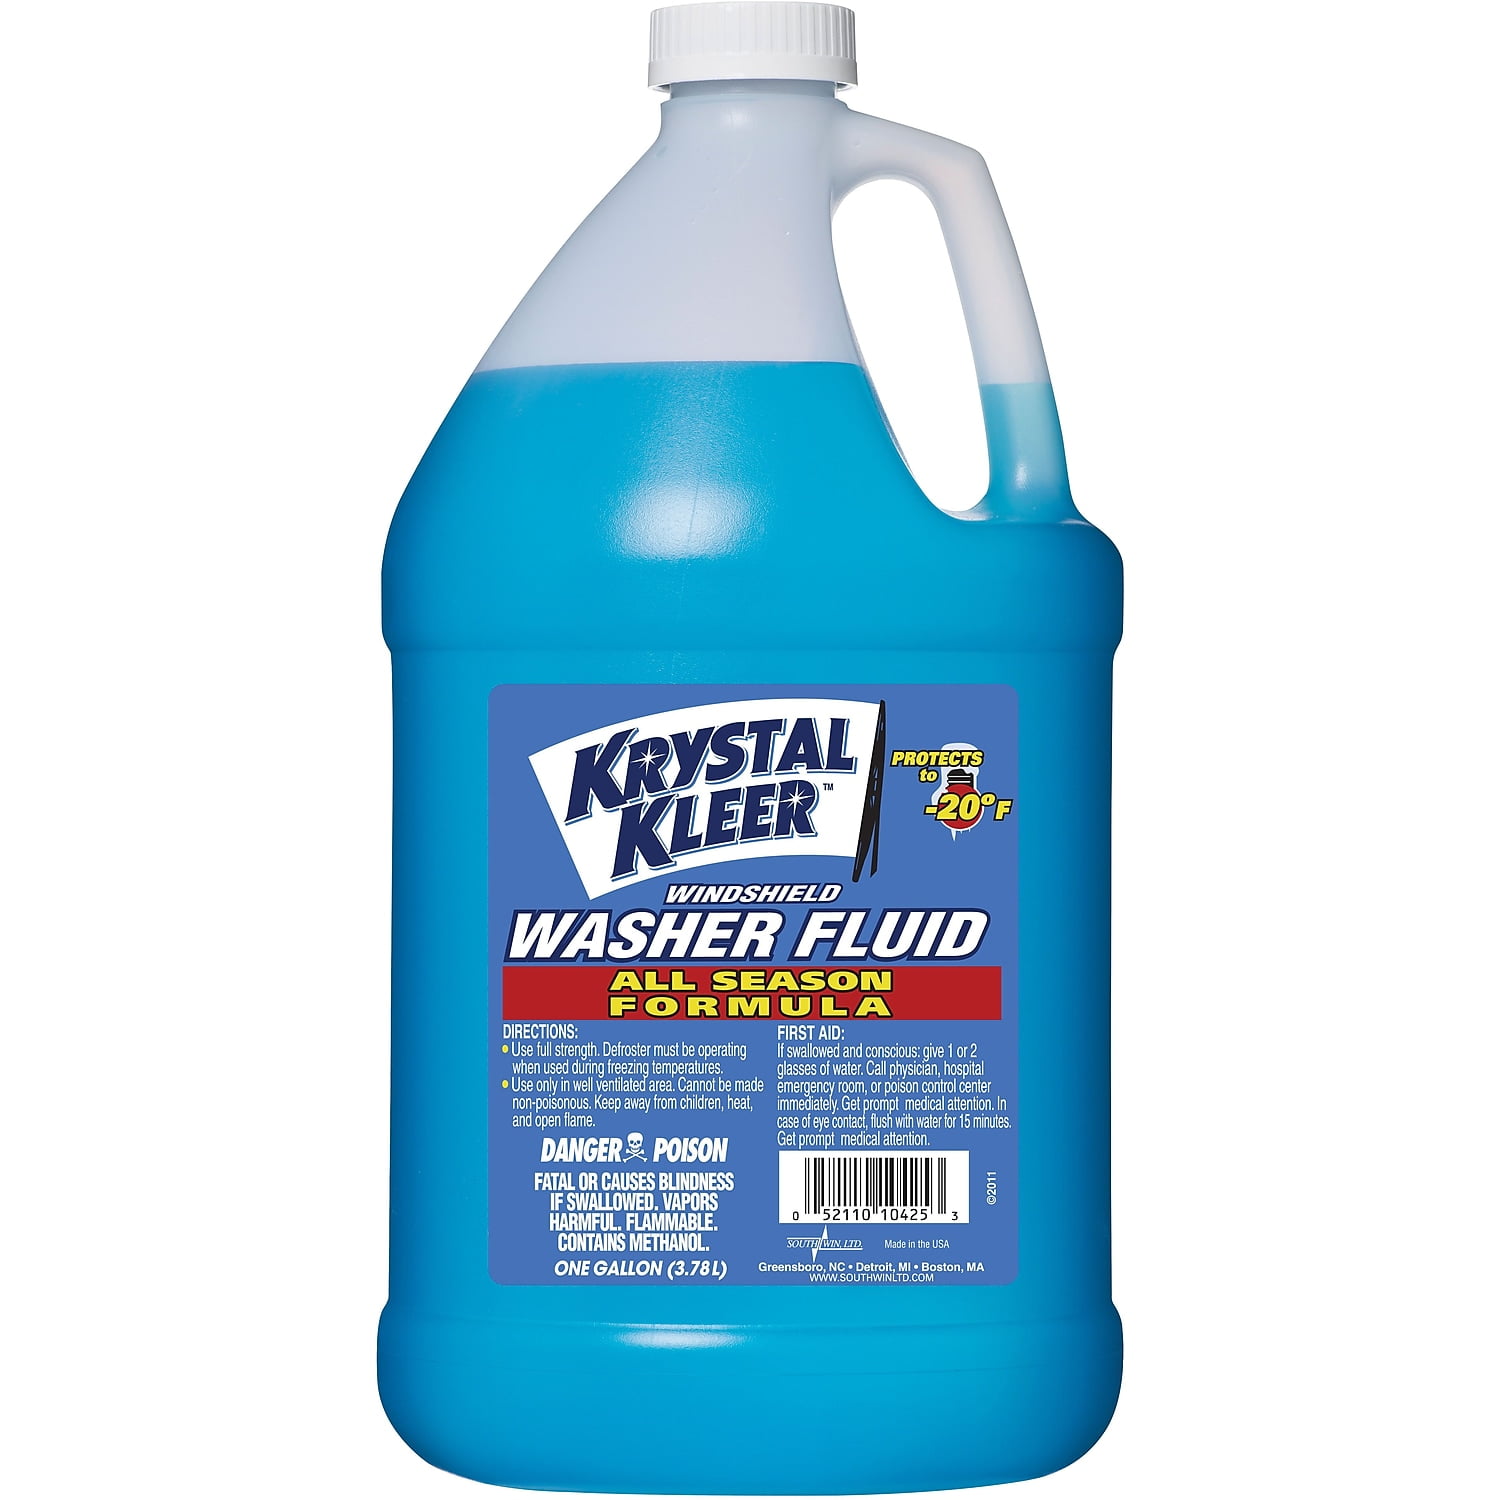 Queen of Clean: Homemade Windshield Washer Fluid